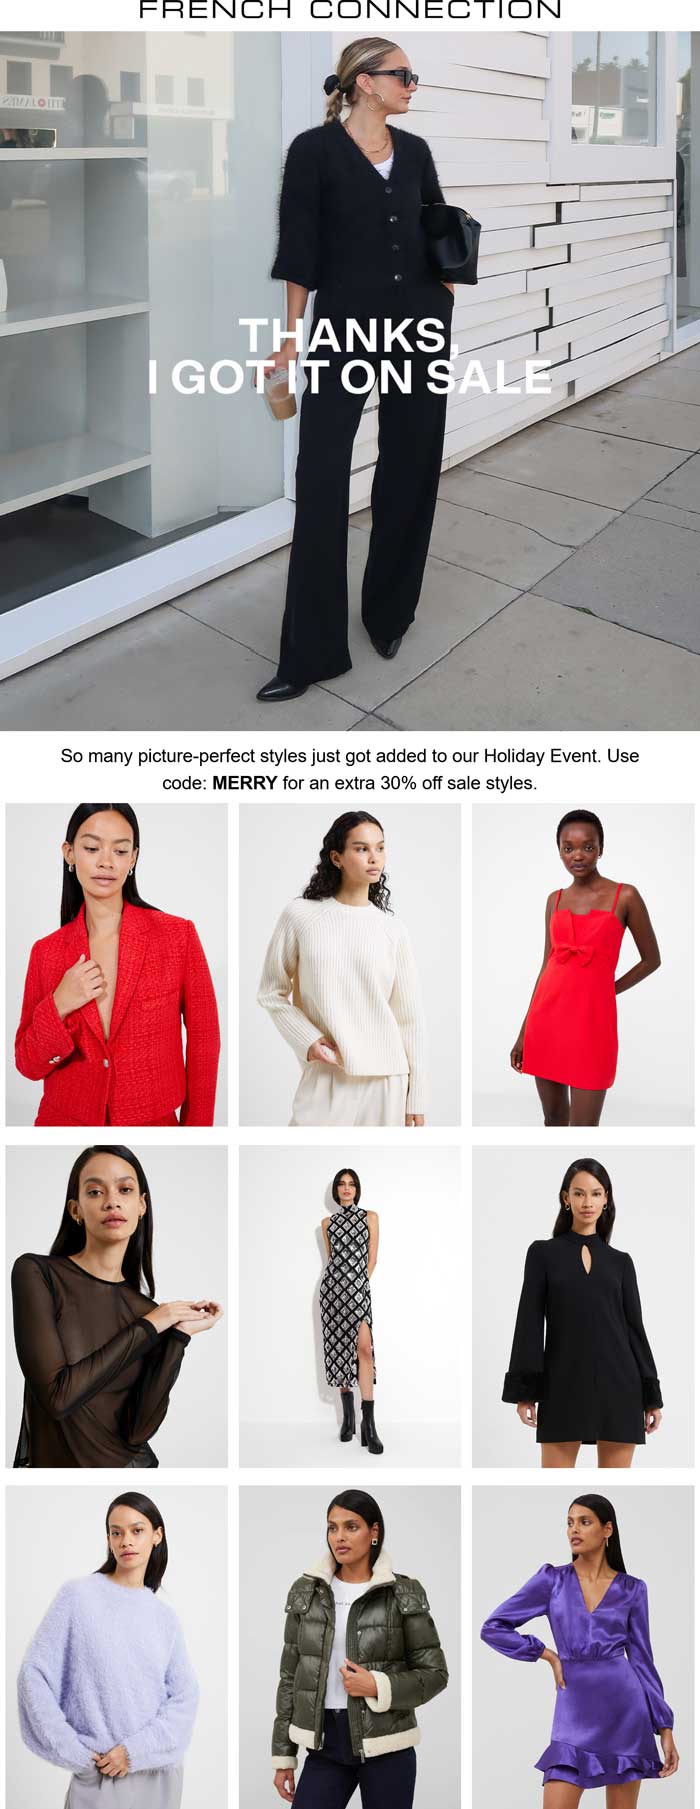 French Connection stores Coupon  Extra 30% off sale styles at French Connection via promo code MERRY #frenchconnection 